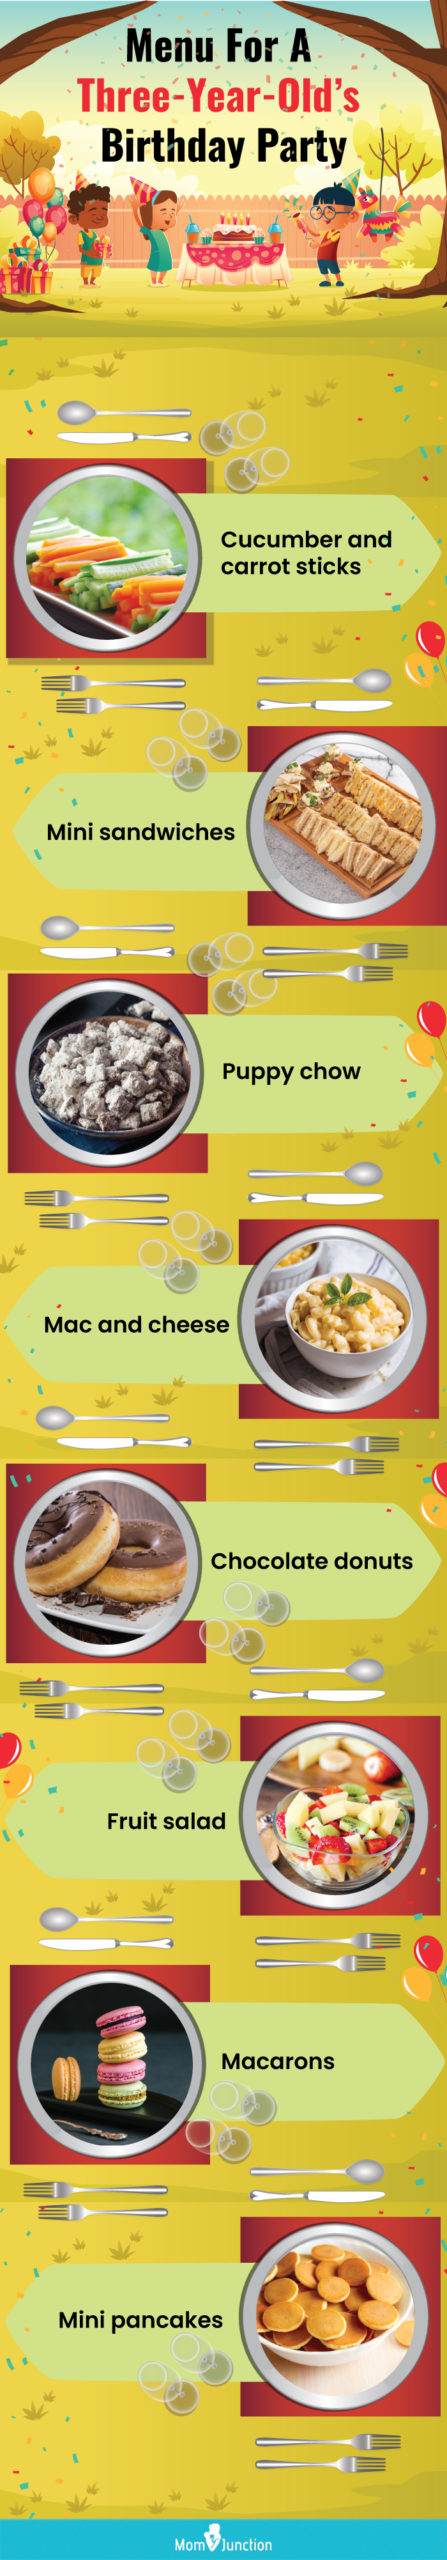 menu for a three year olds birthday party (infographic)